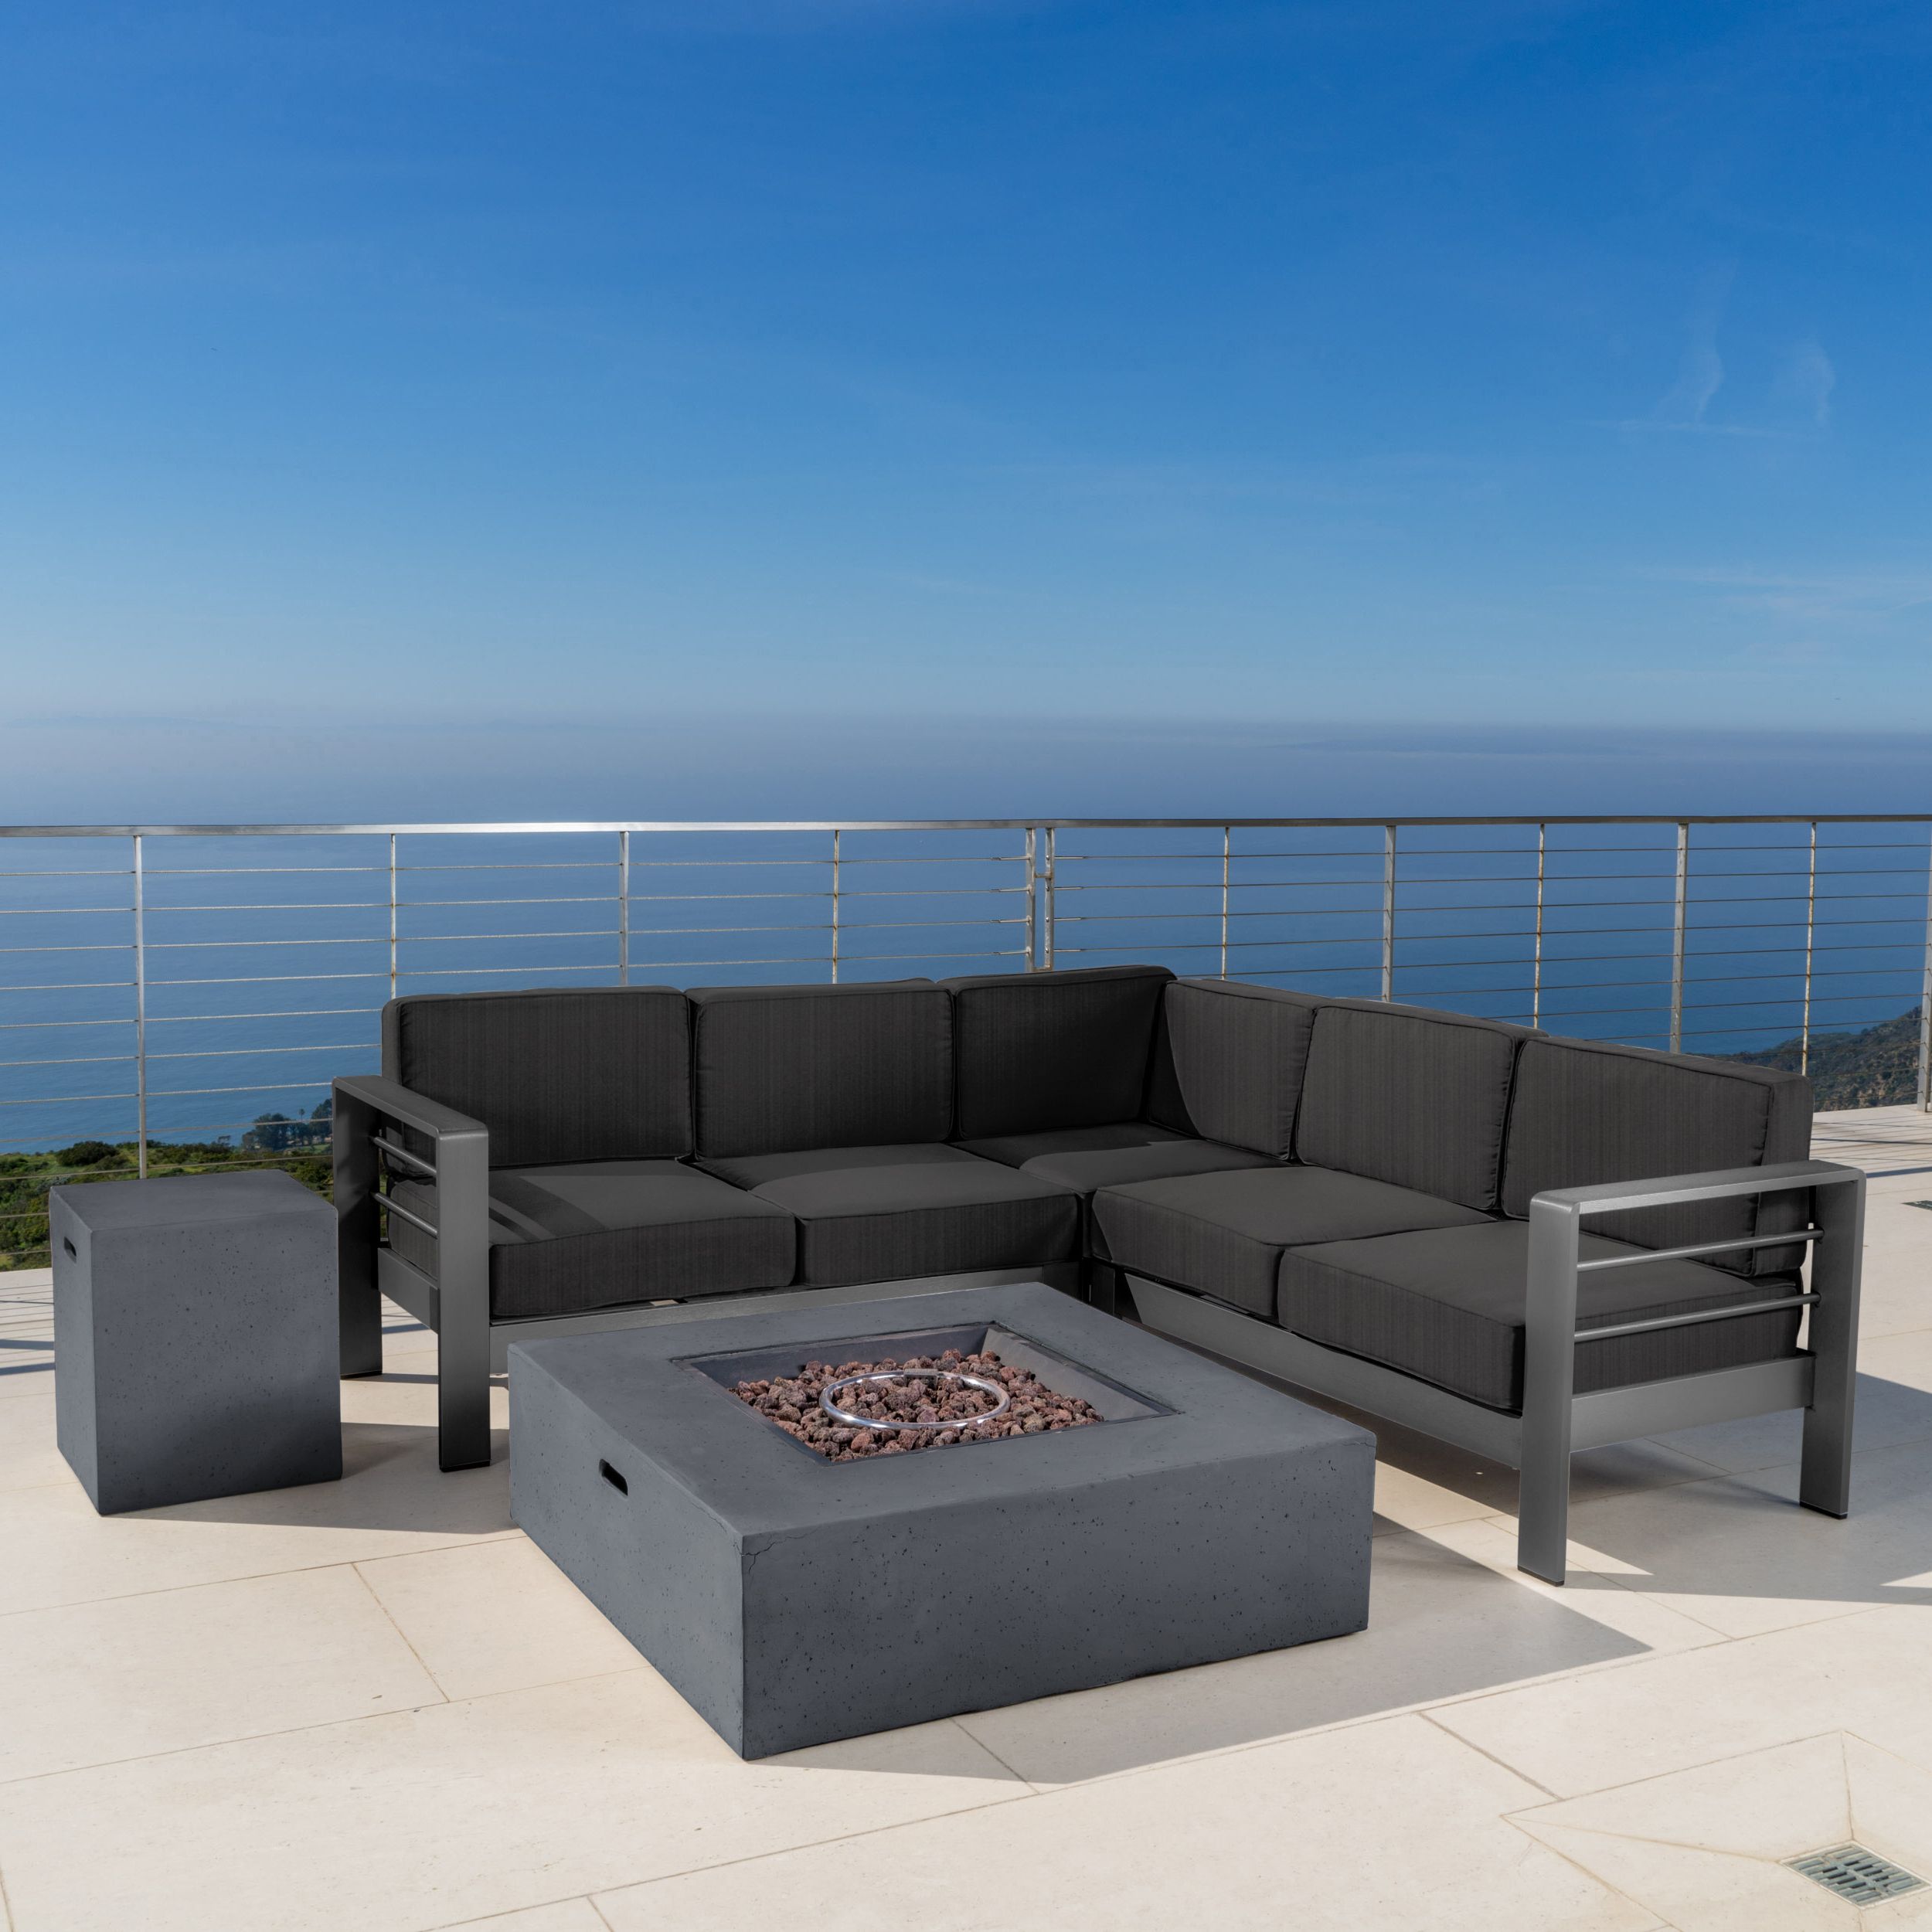 Fashionable Black And Gray Outdoor Table And Chair Sets Within Noble House Miller Outdoor Aluminum 5 Piece V Shape Sectional Sofa Set (View 11 of 15)